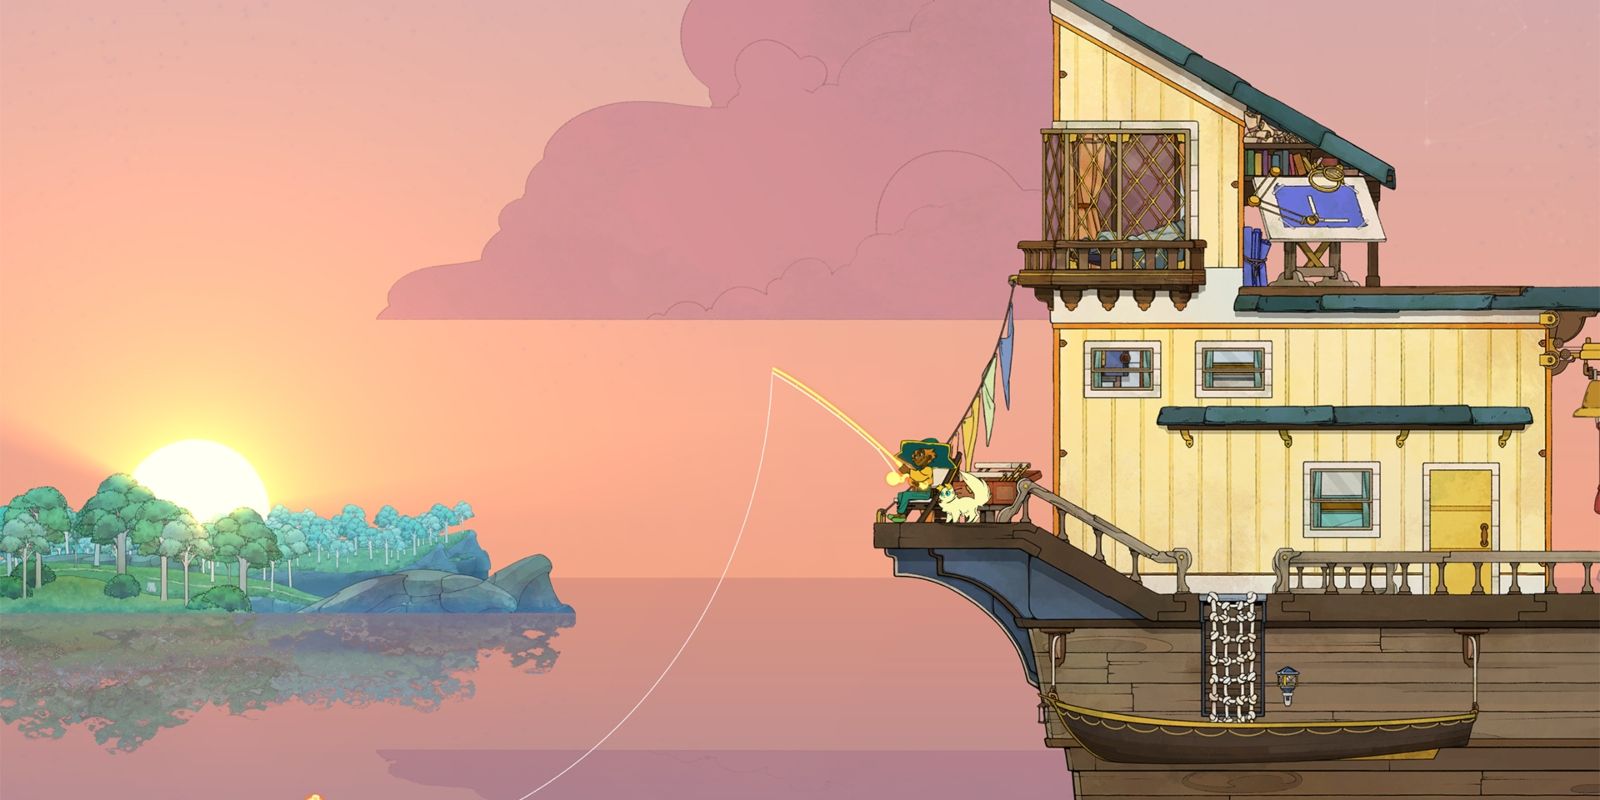 A screensot from the game featuring the protagonist fishing on her boat.